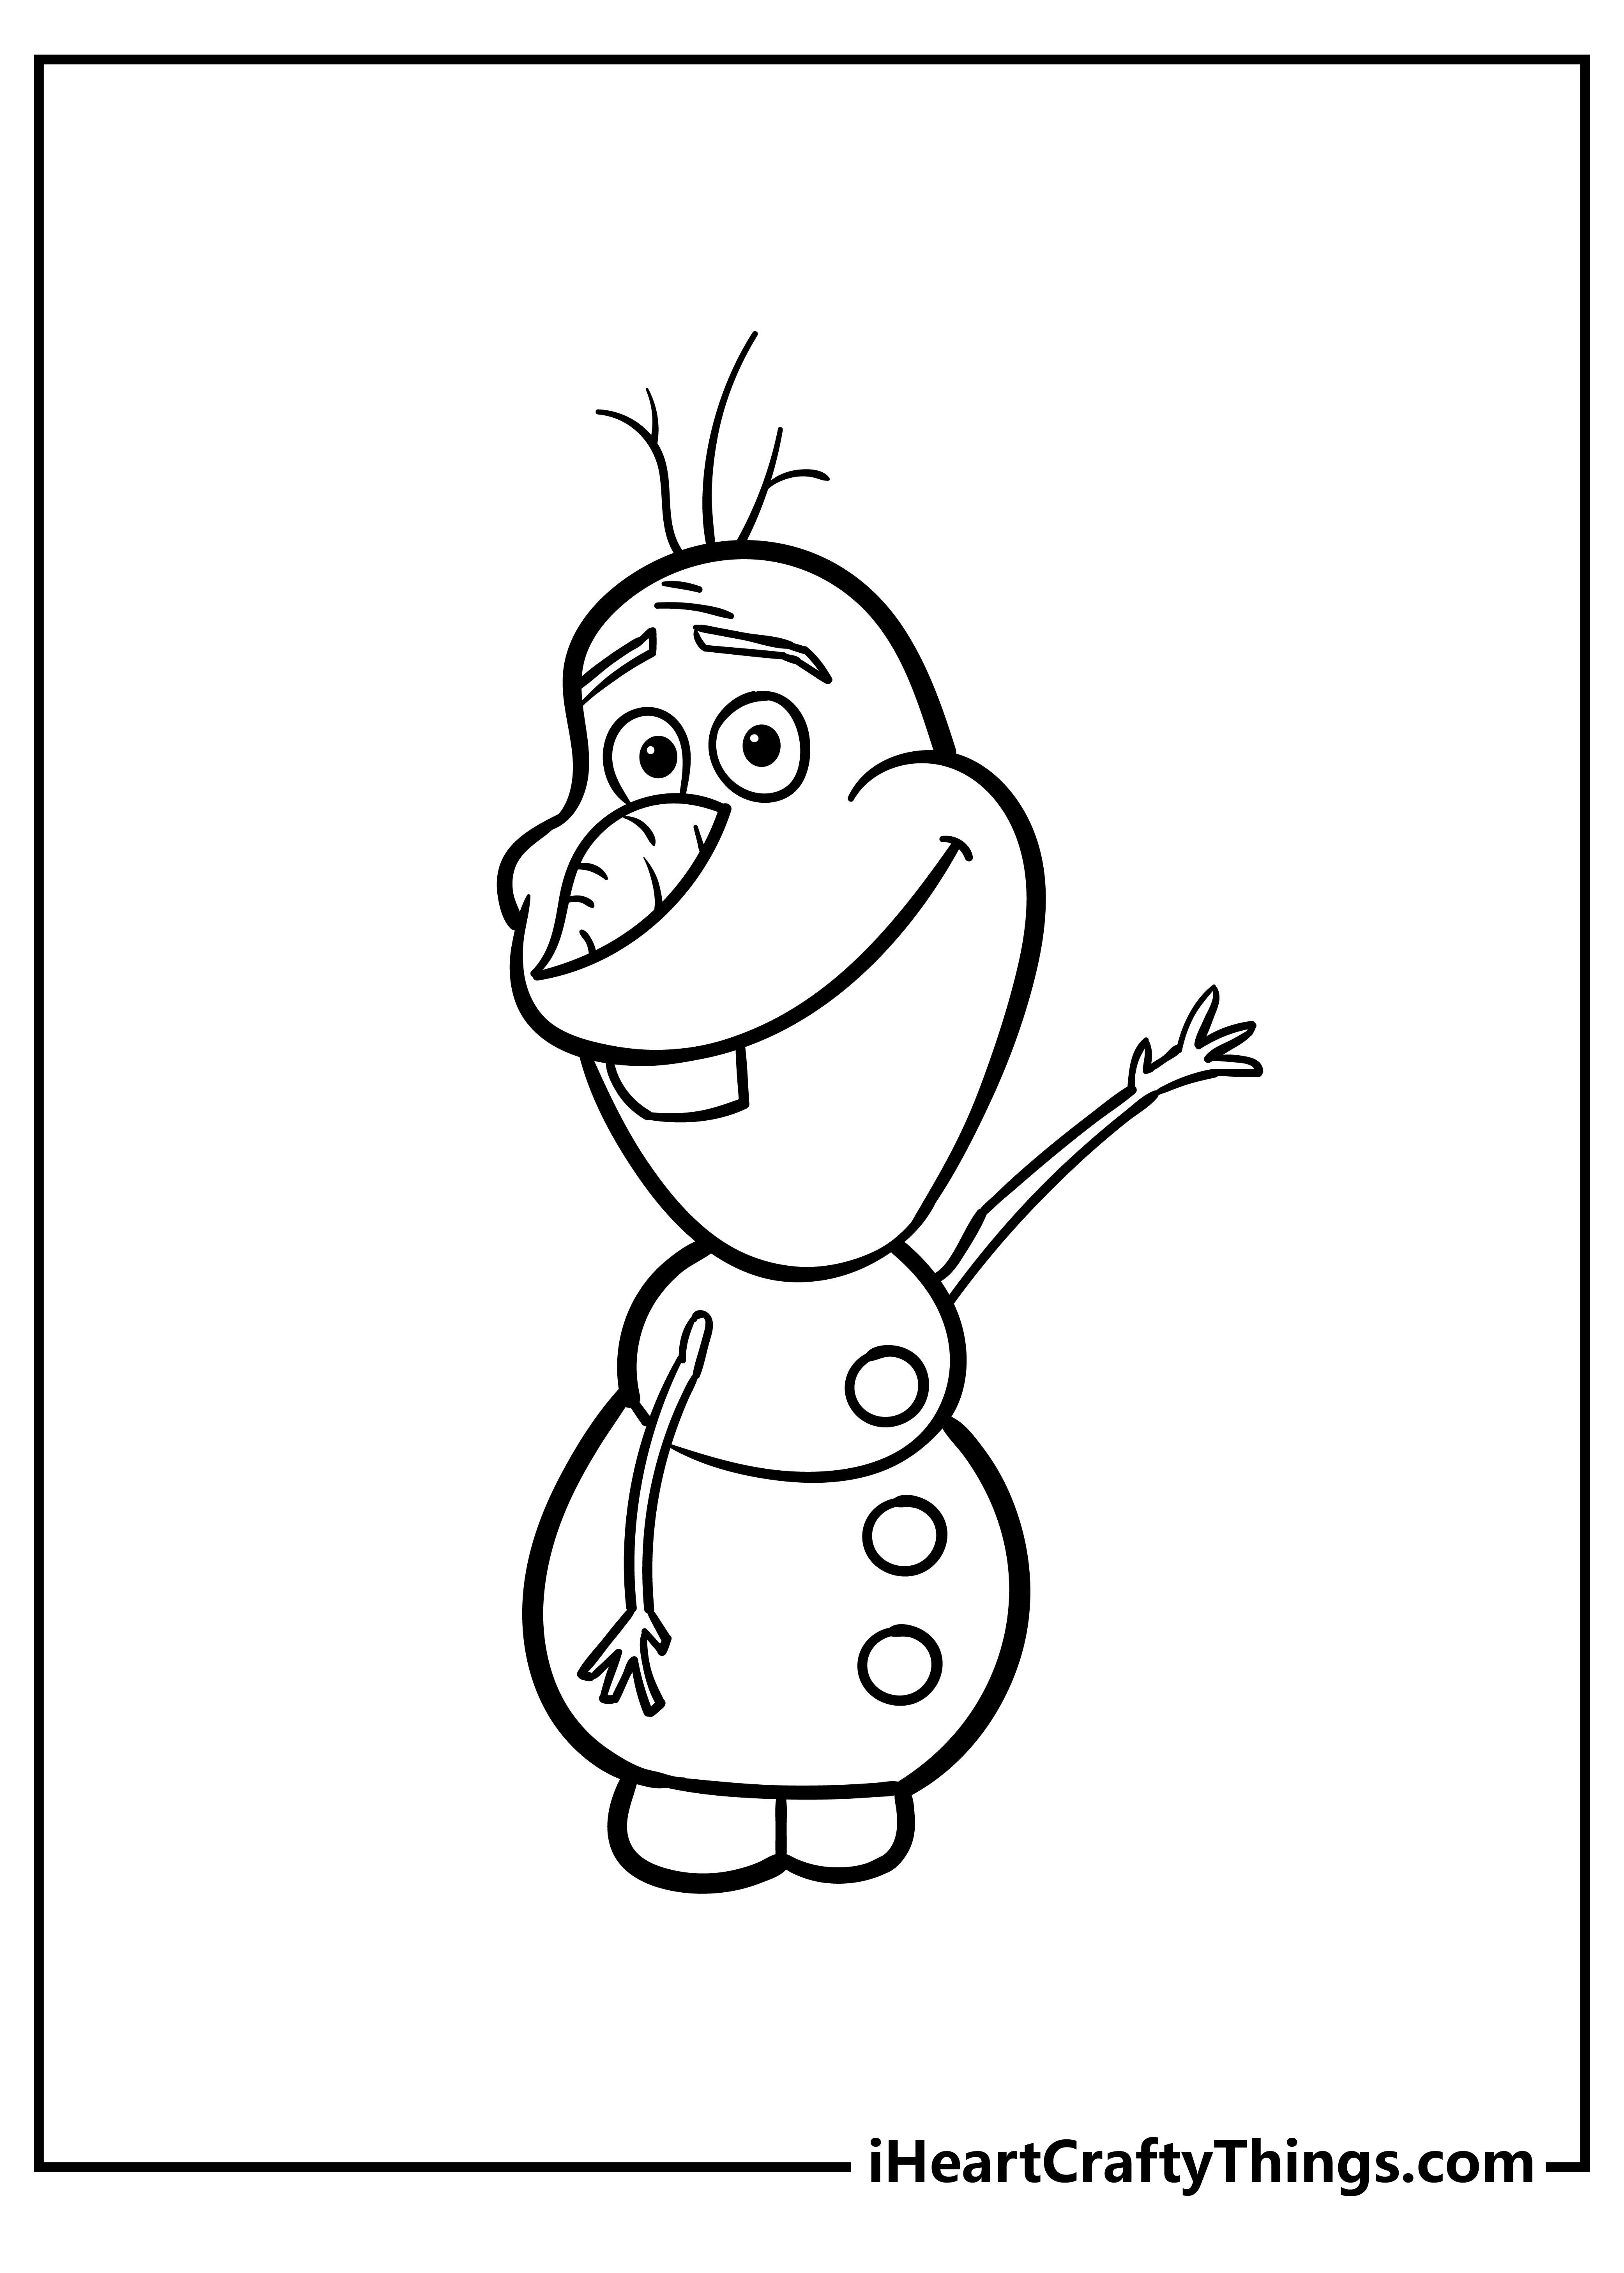 Olaf Coloring Pages free pdf download